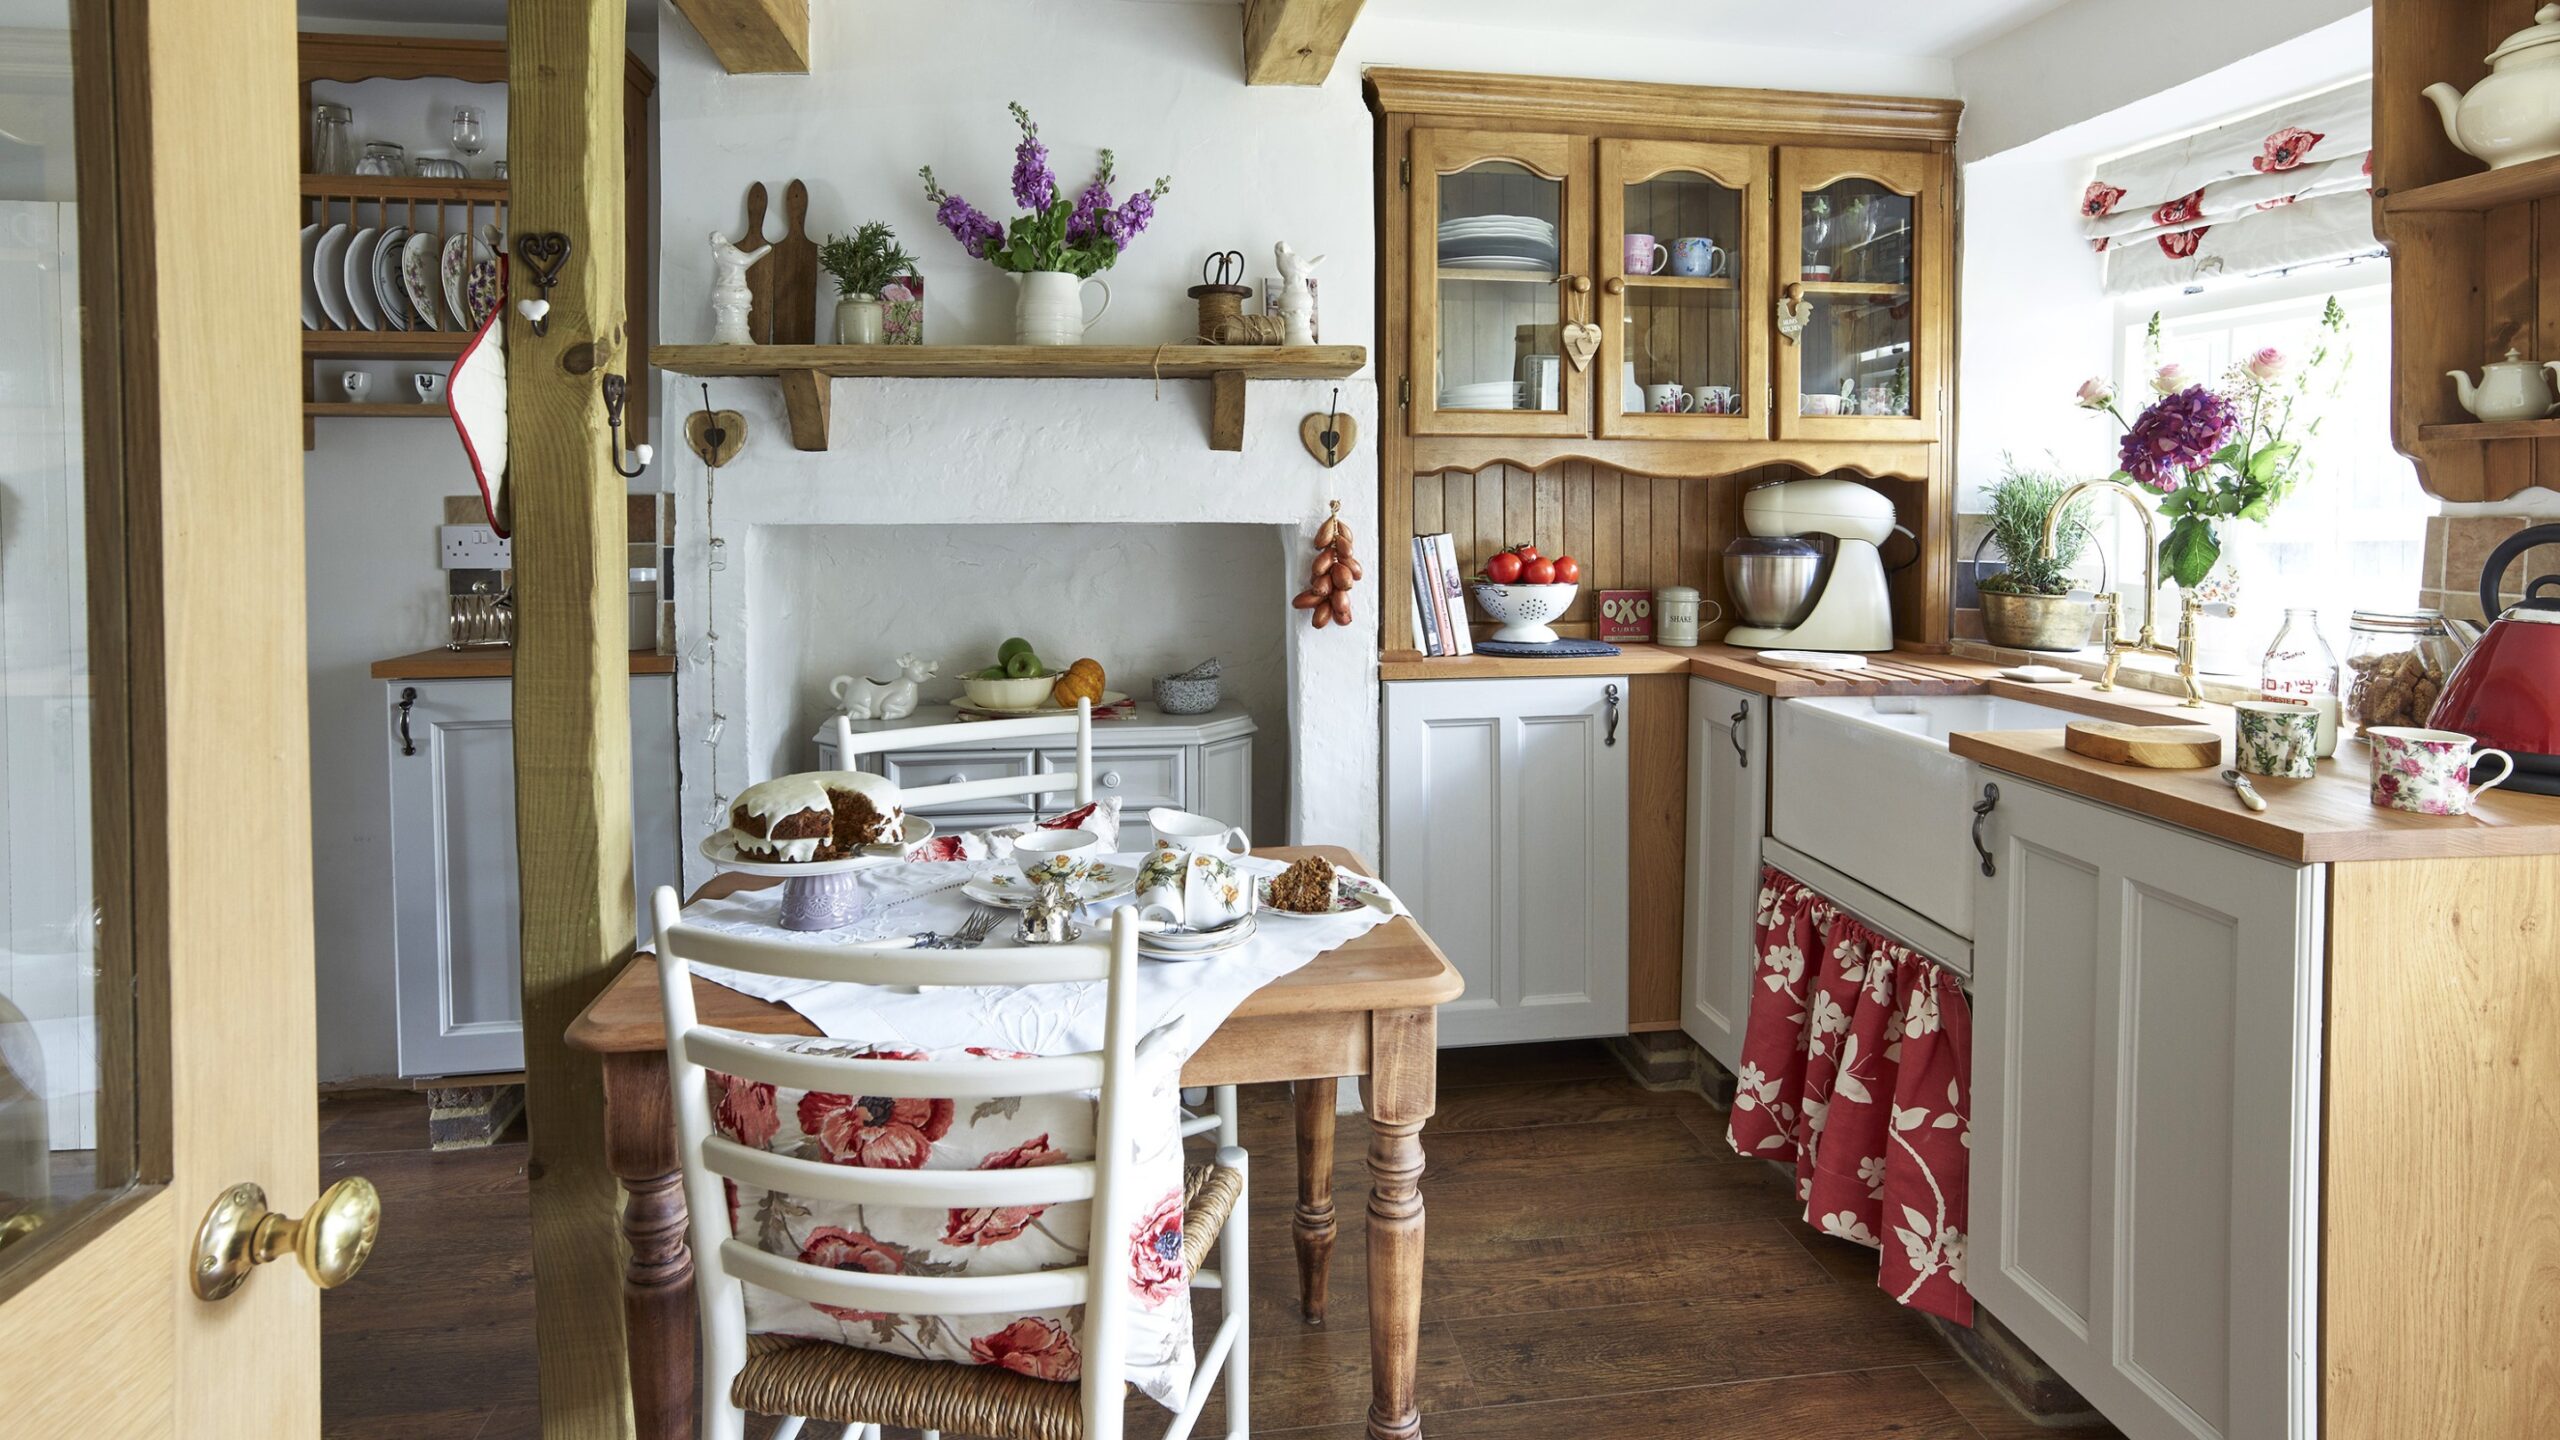 Cottage kitchens: 9 inspiring ideas for your room  Real Homes - what is a cottage kitchen?